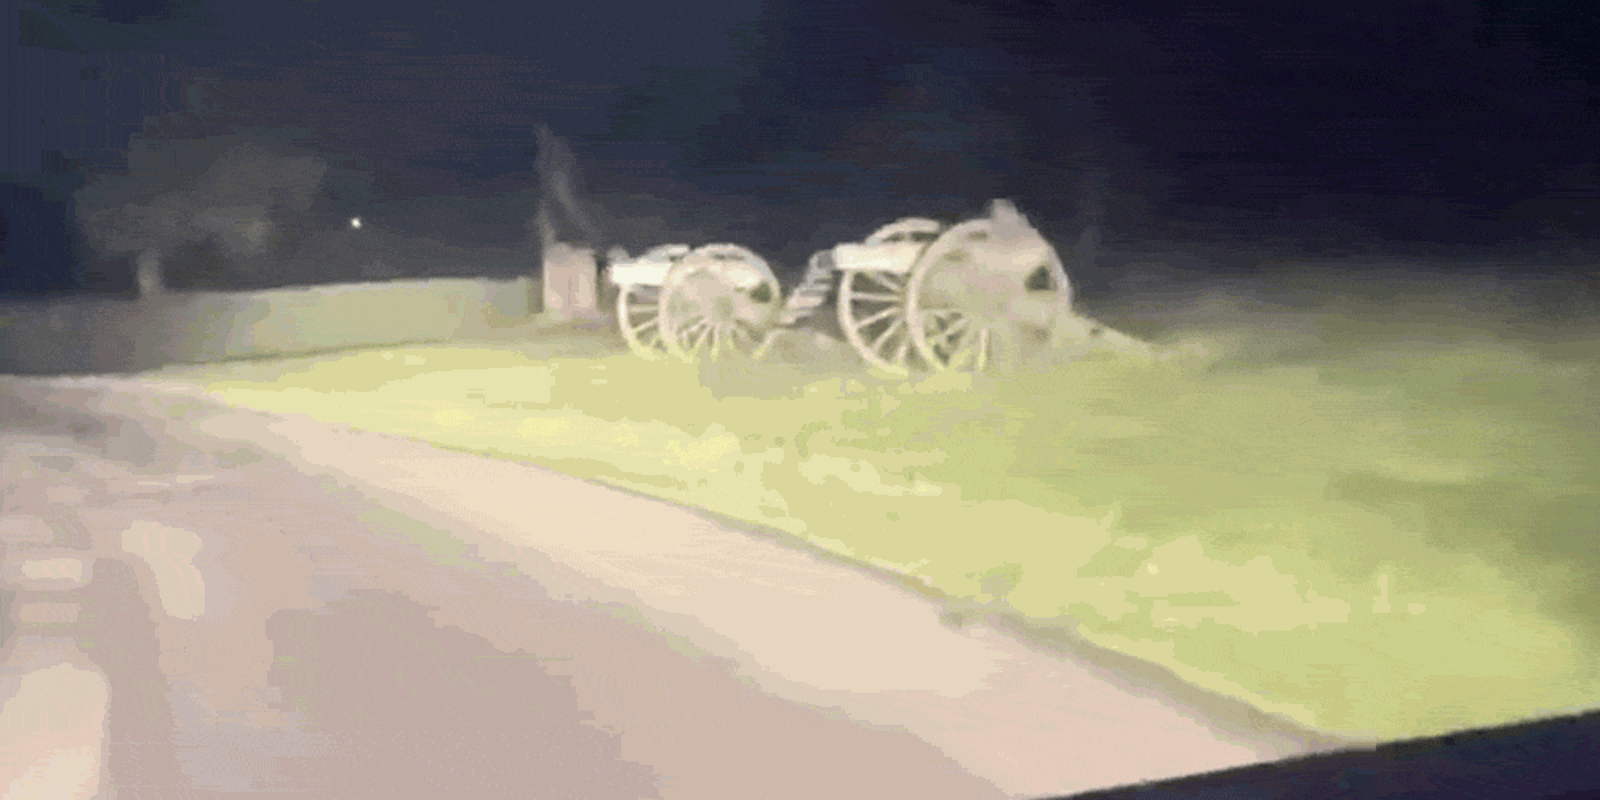 cannons distorted through water on windshield of car become gettysburg 'ghosts'